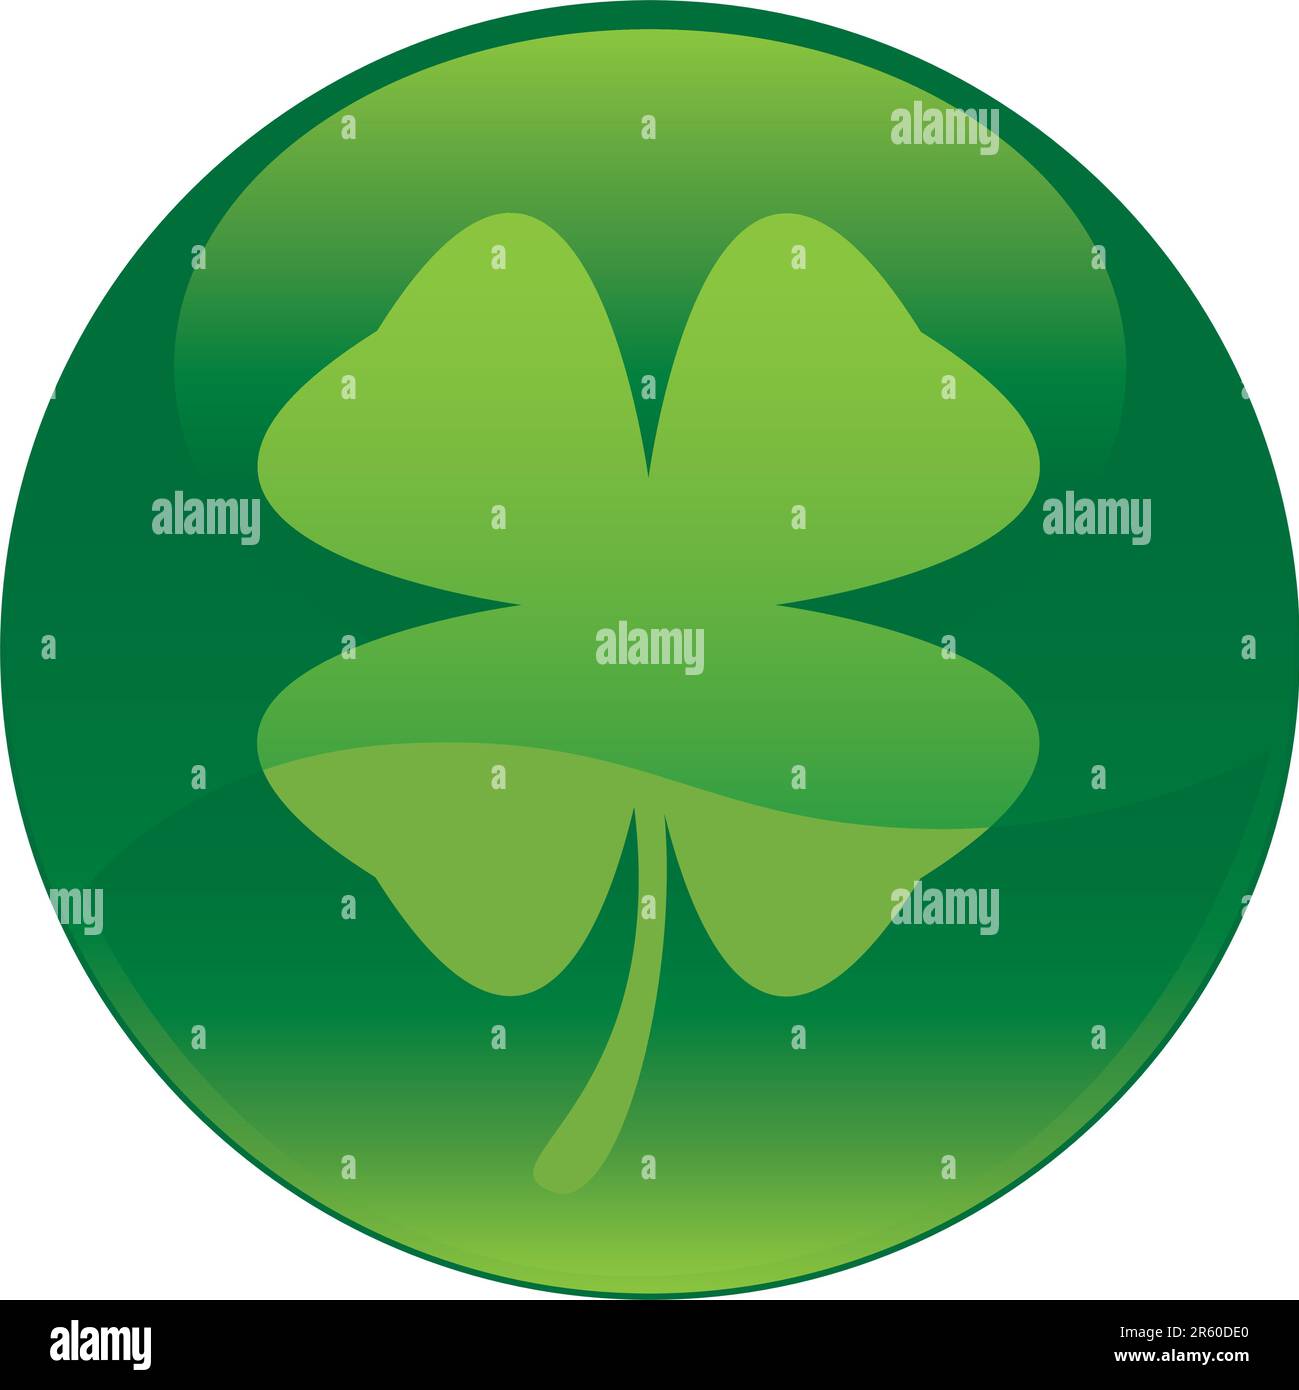 Vectoral Shamrock icon. You can edit this image on vectoral softwares such as illustrator, freehand, coreldraw etc. Stock Vector